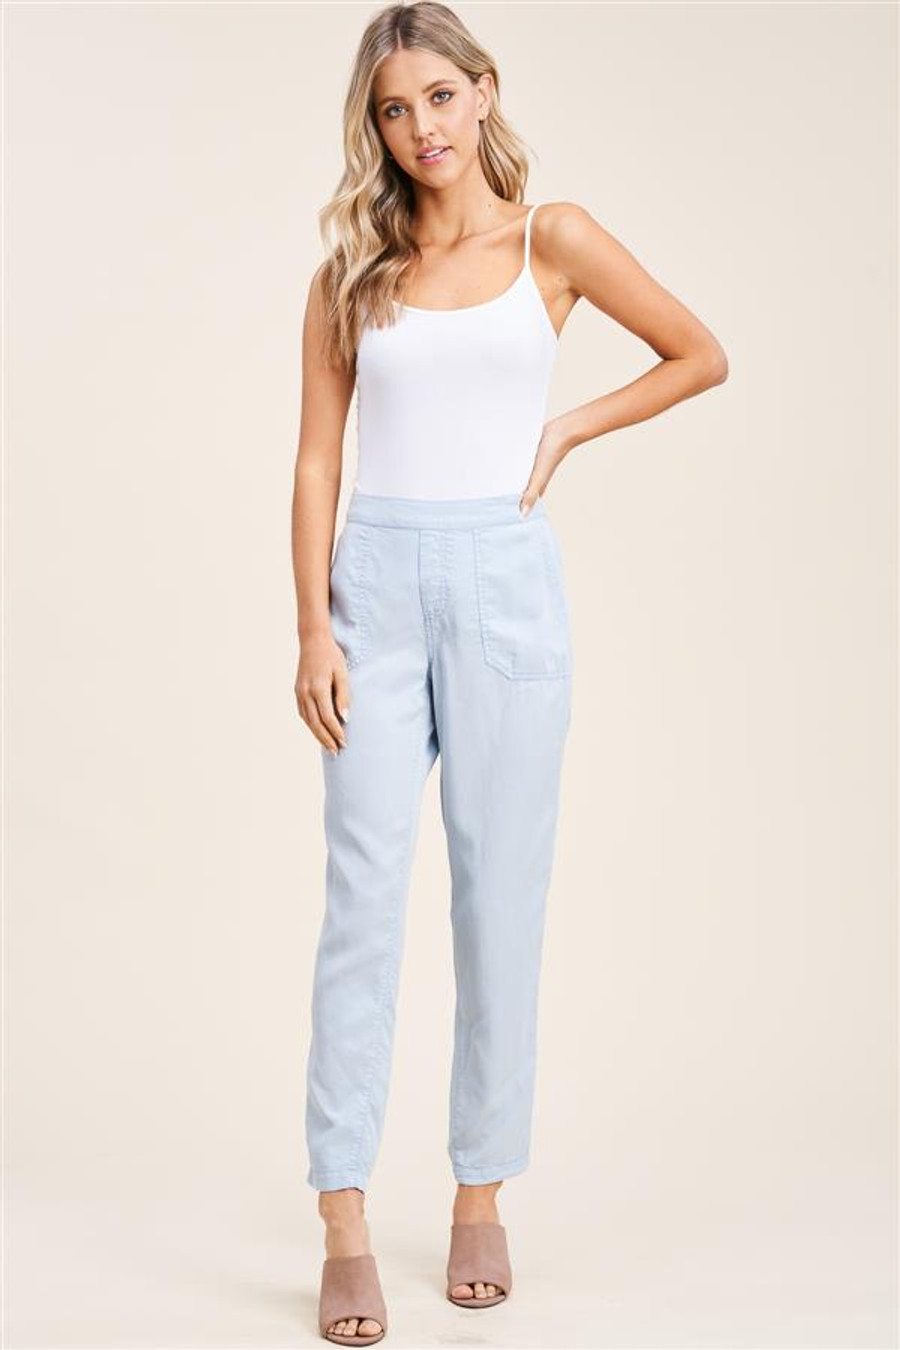 Staccato Garment Dyed Pants - Chambray